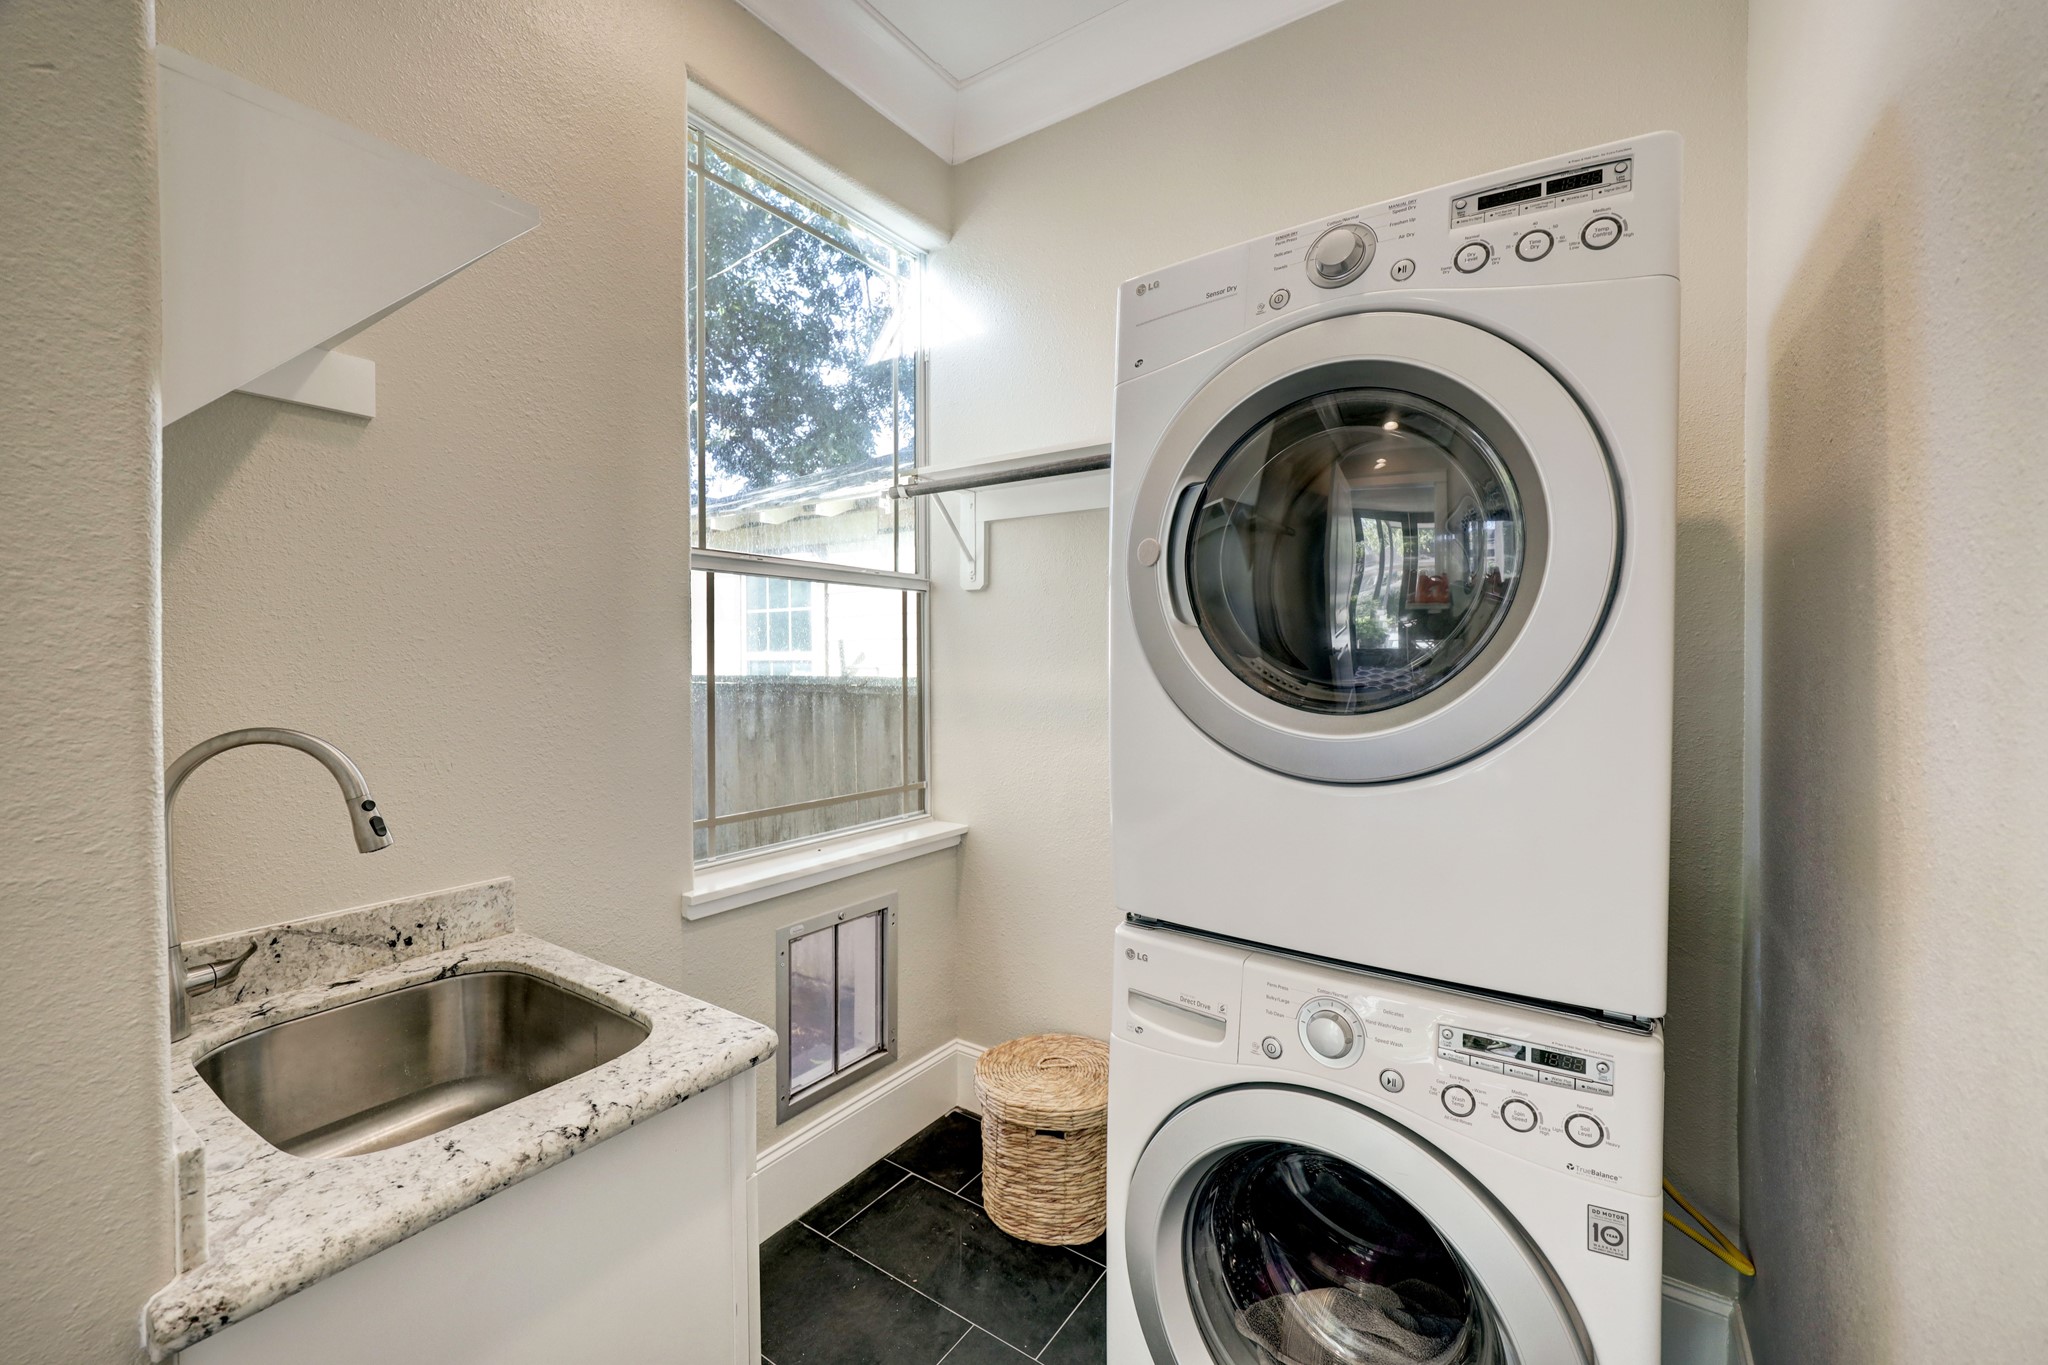 The oversized laundry room includes a sink, electric and gas hookups for dryer, and a dog door.